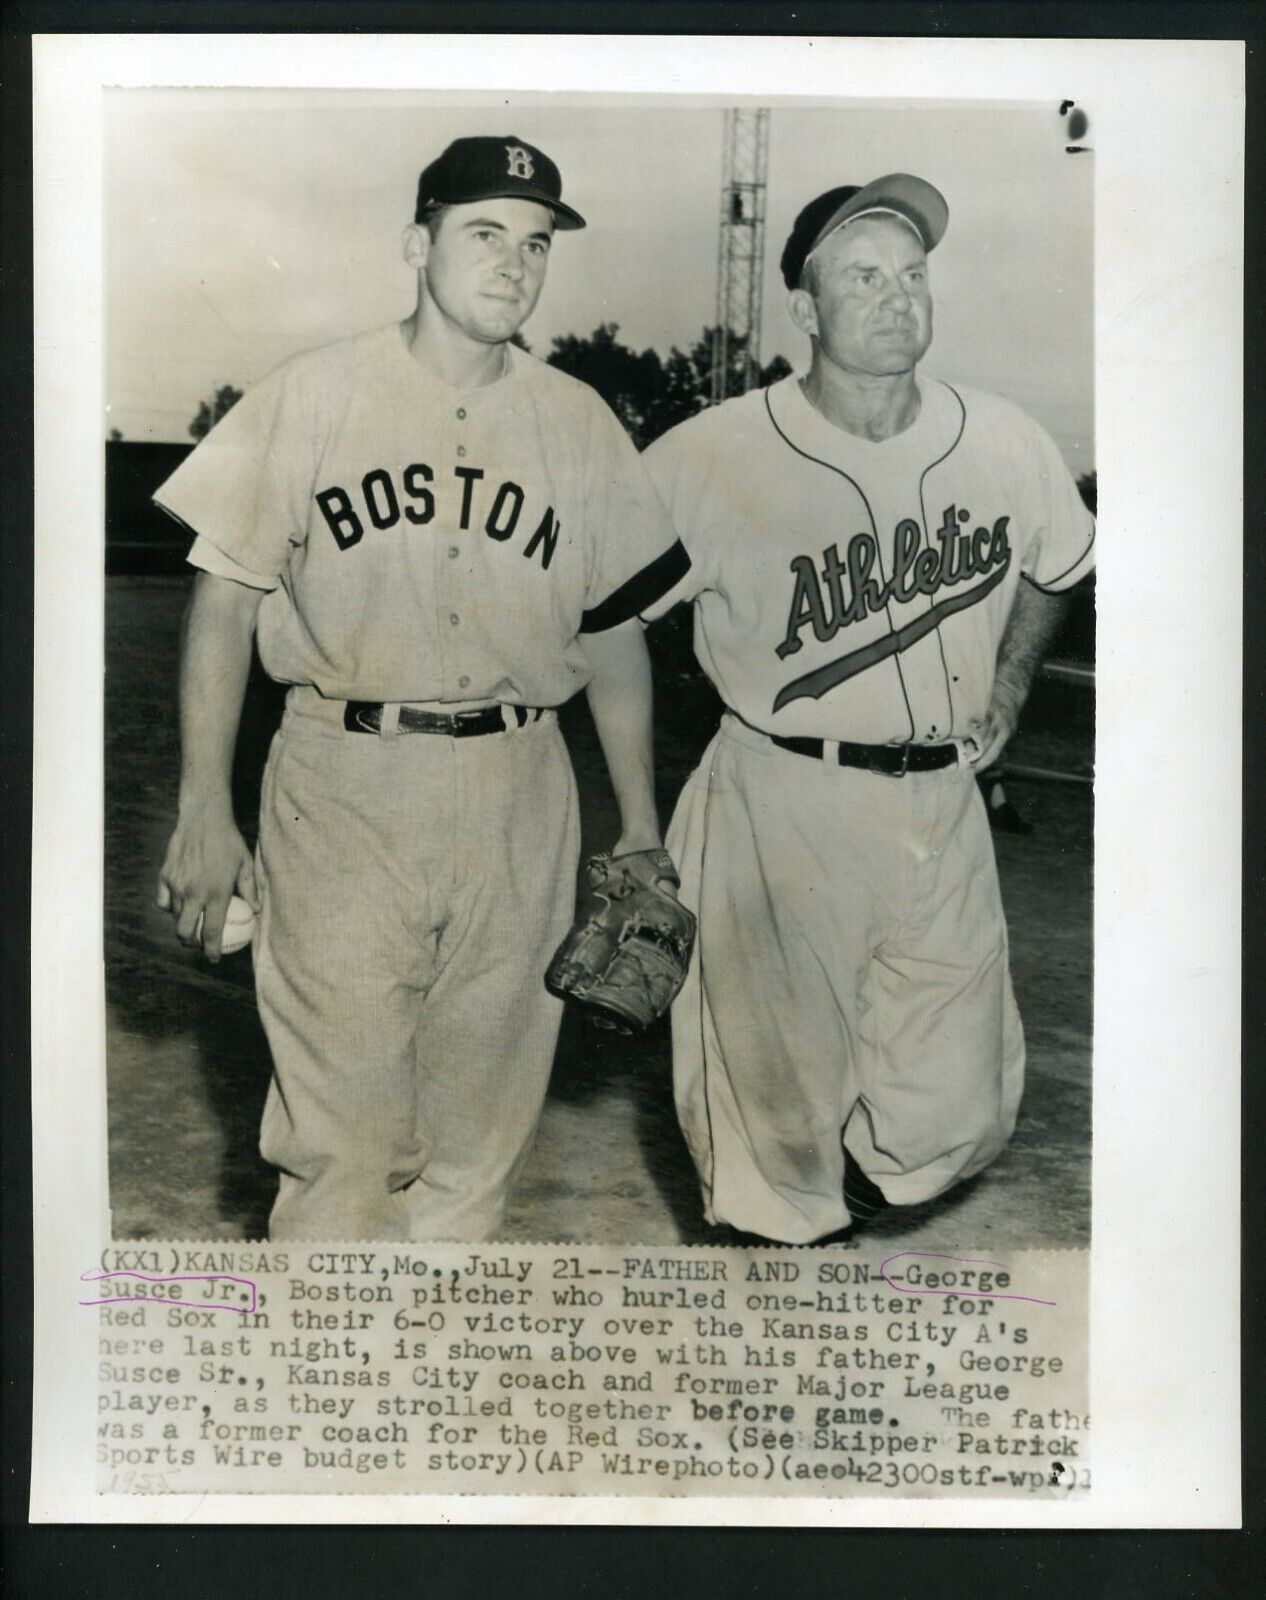 George Susce Jr. & George Sr. 1955 Press Photo Poster painting Boston Red Sox Kansas City A's